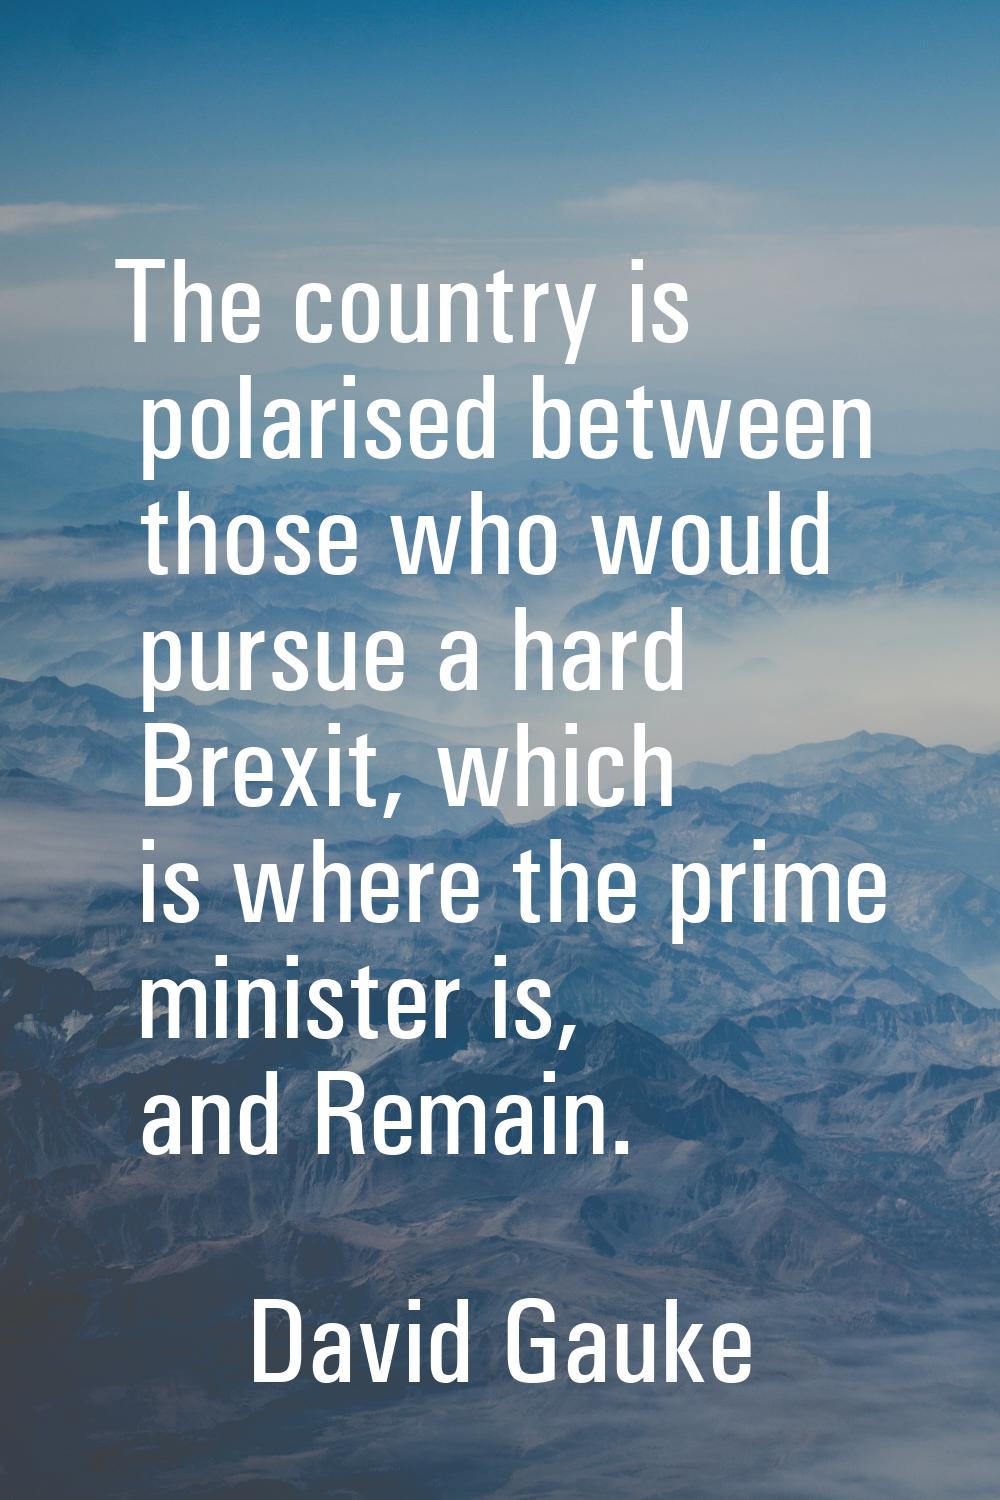 The country is polarised between those who would pursue a hard Brexit, which is where the prime min